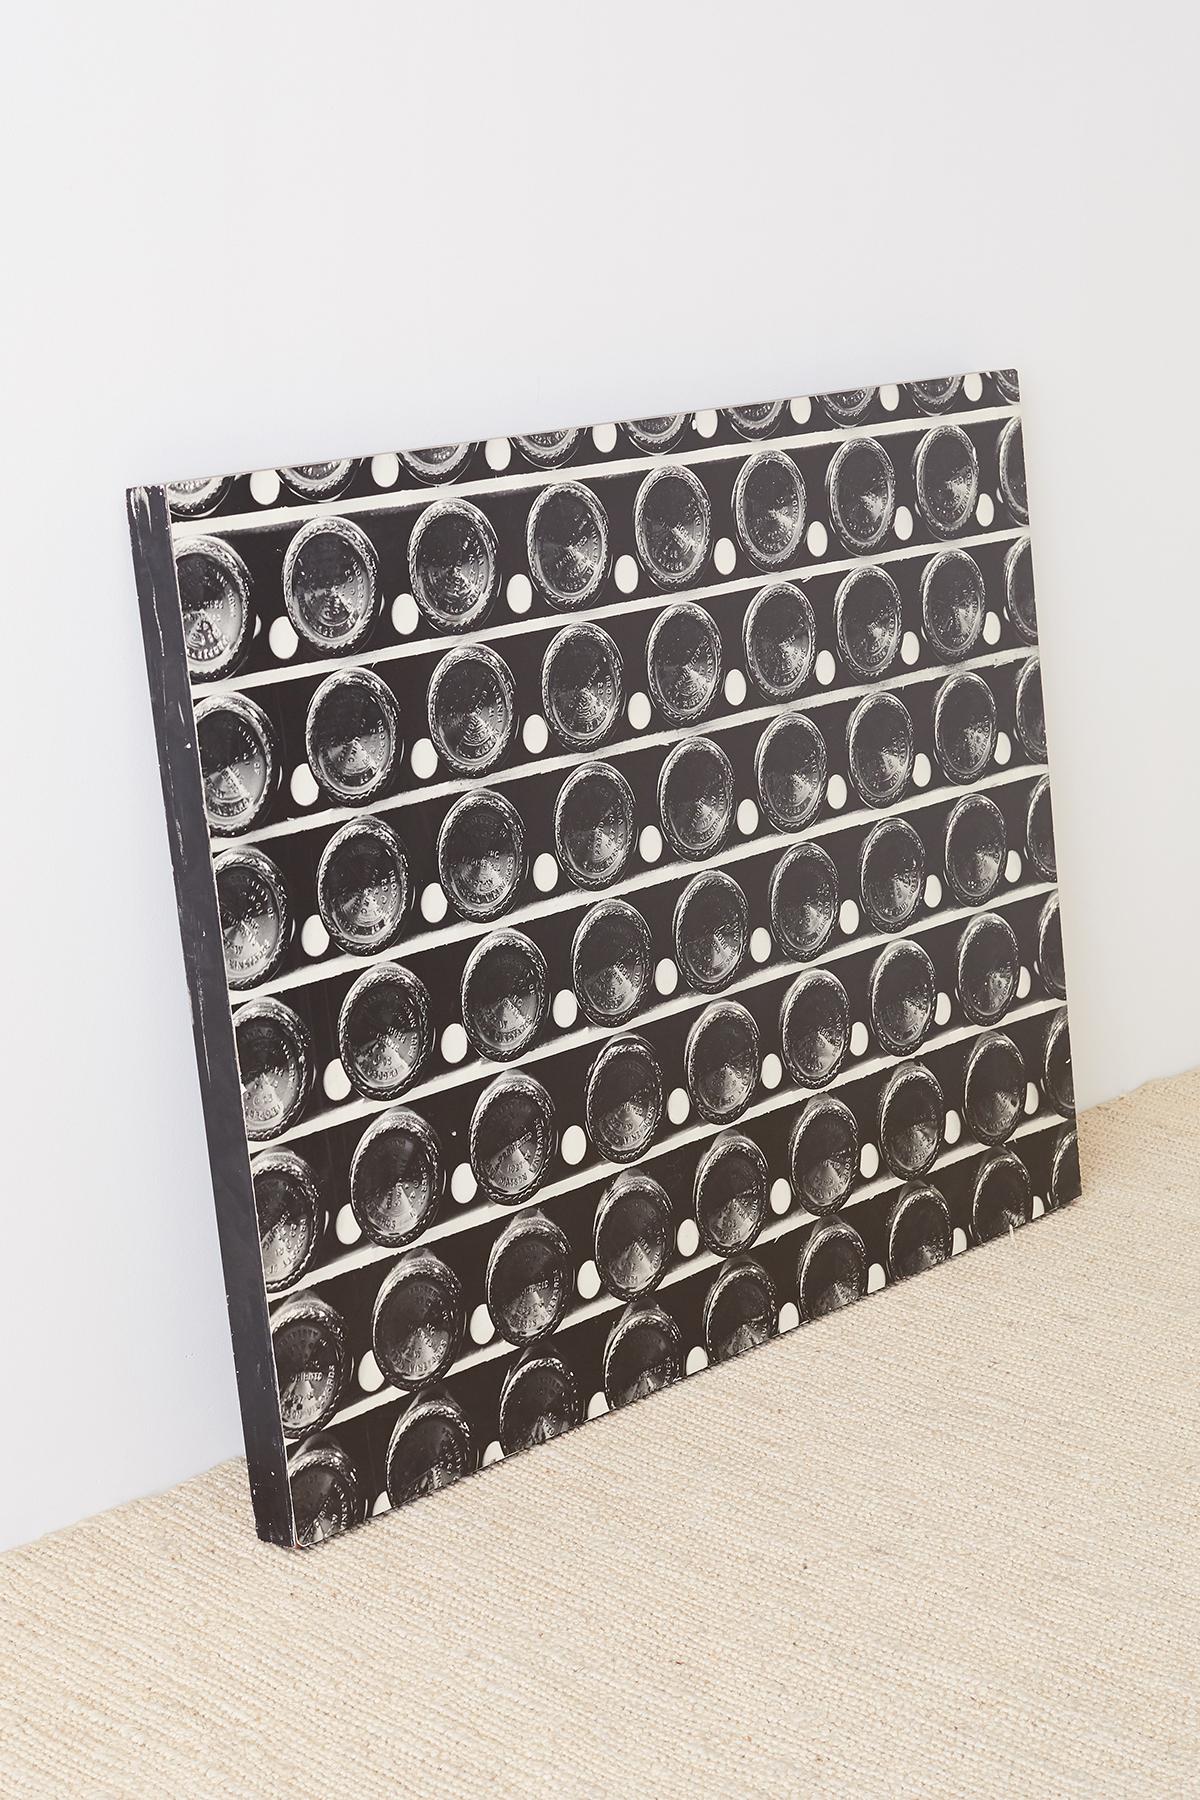 Cellar Bottles by Ansel Adams (1904-1984). Mounted print on board from a gelatin silver print of rare vintage photos for Paul Mason Vineyards in 1962. The series of photos was titled story of a winery and chronicled the old 1852 Saratoga Vineyards